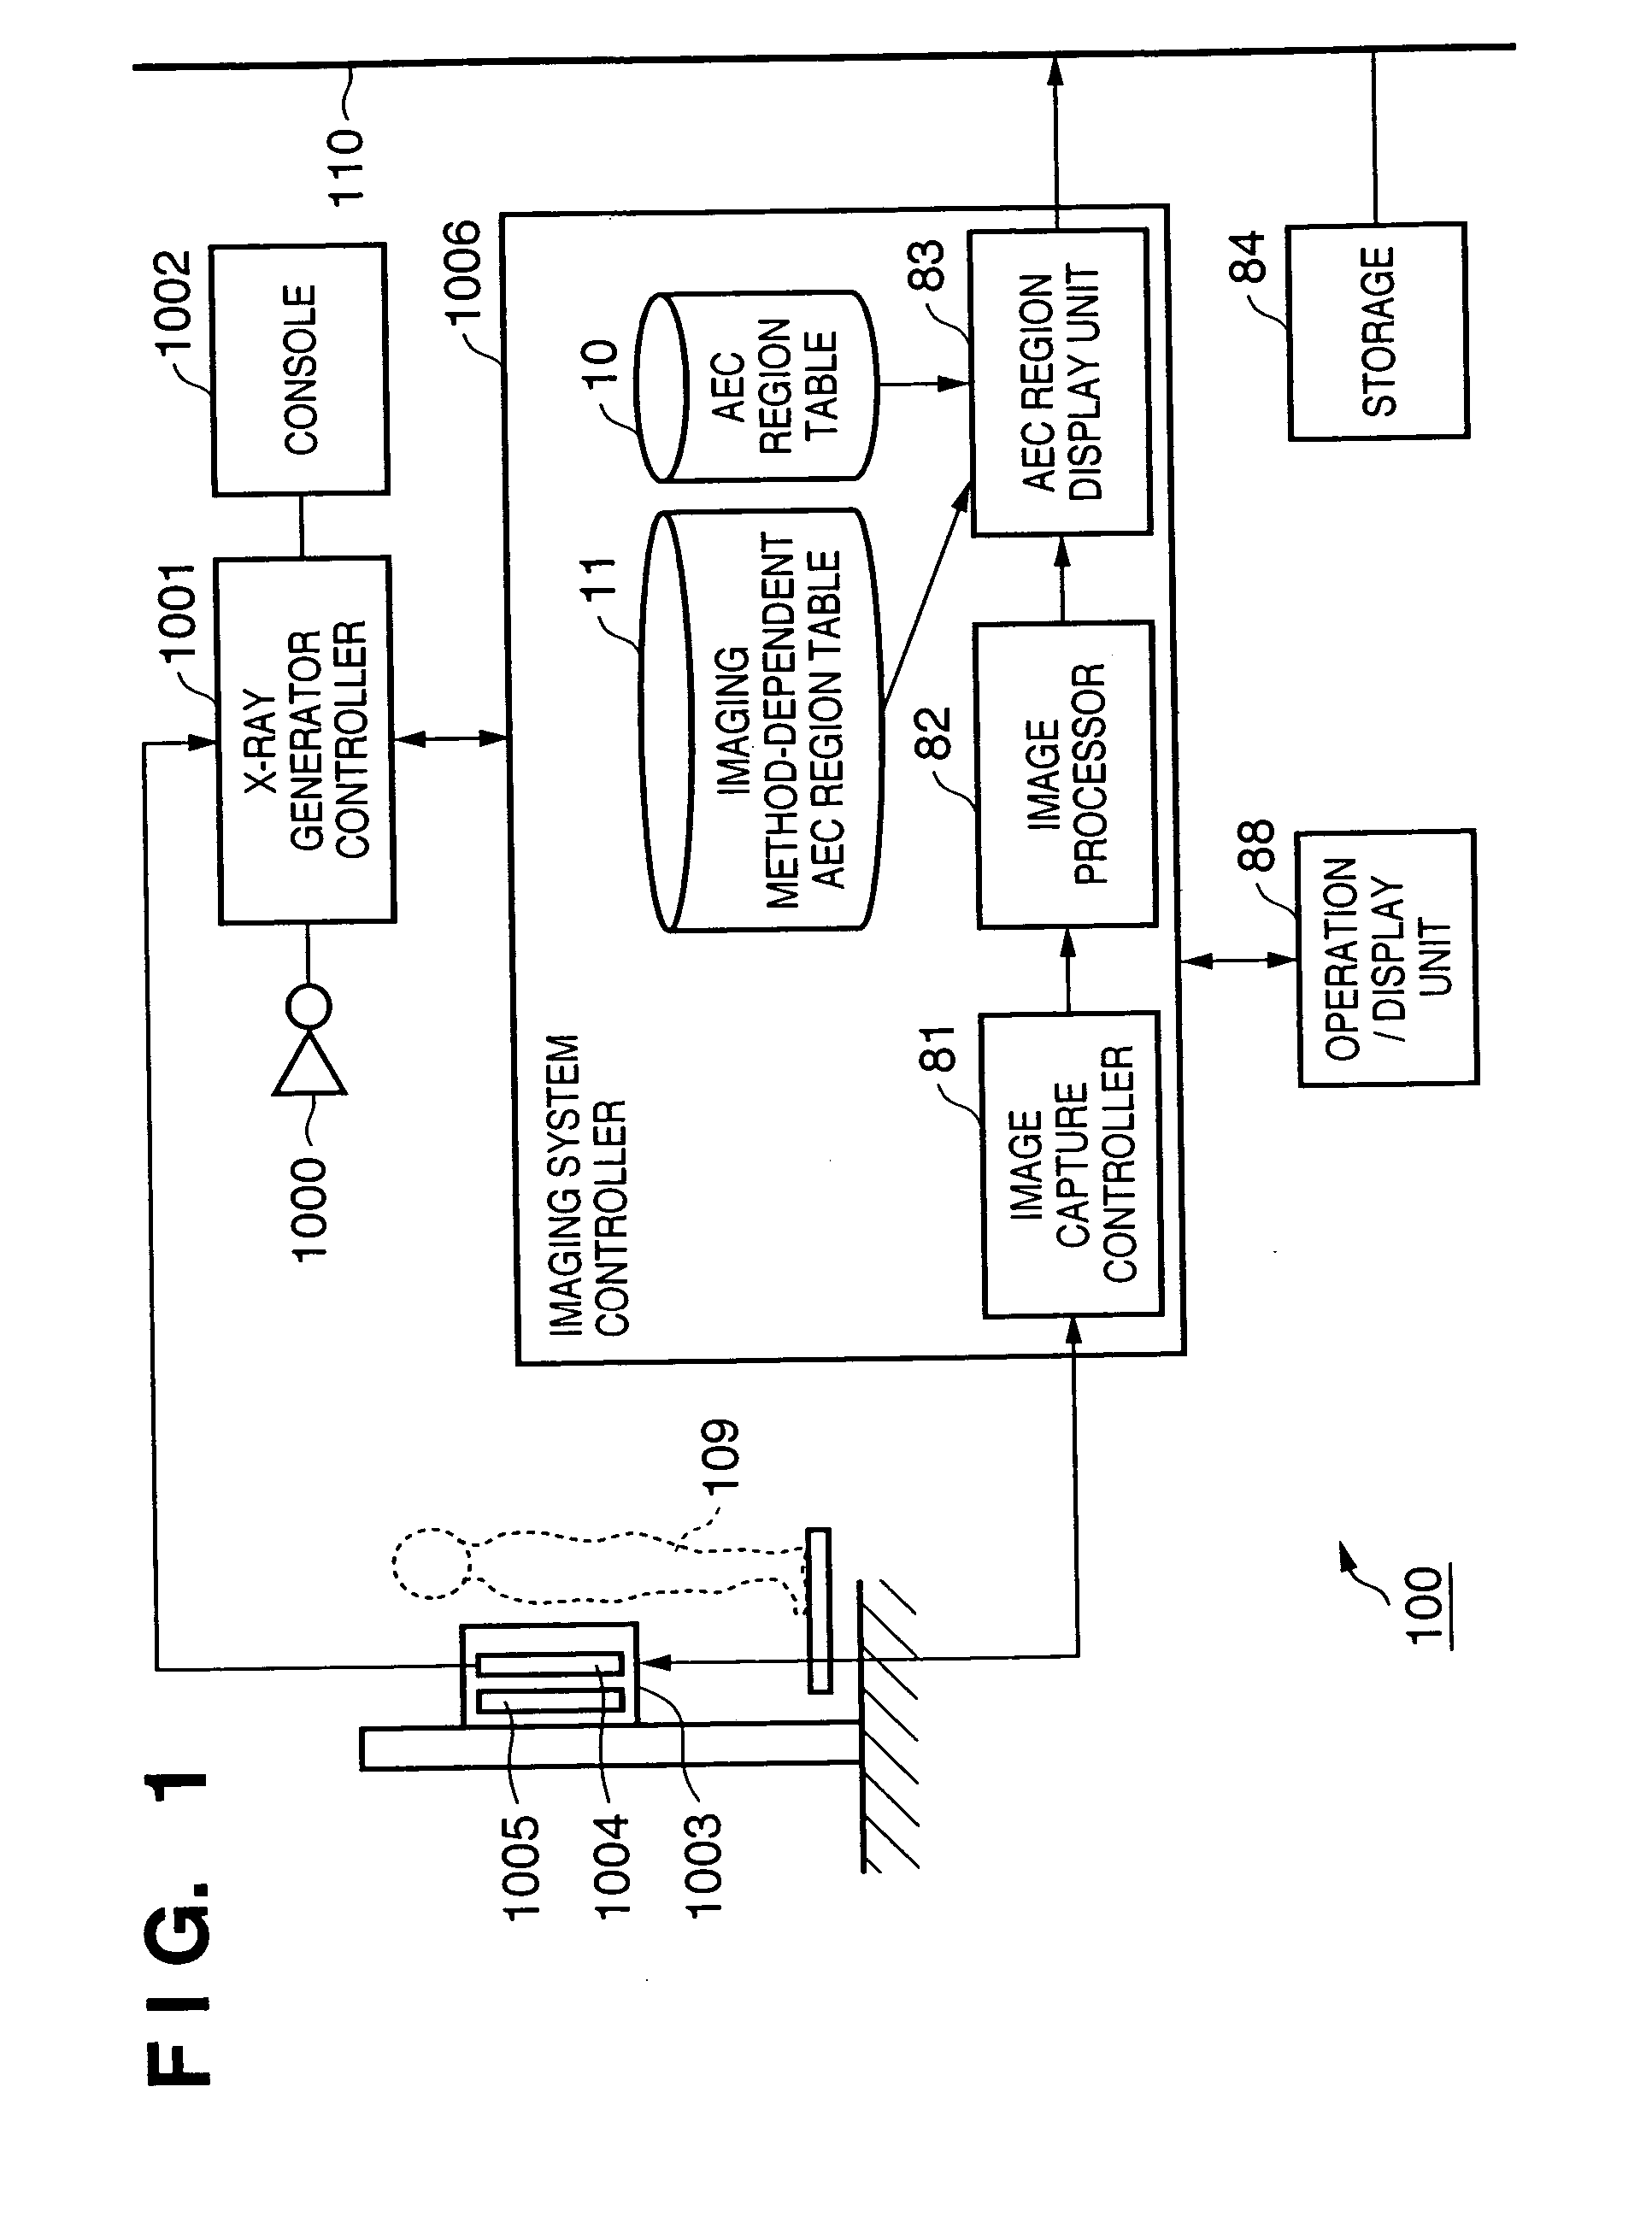 Radiographic imaging control apparatus and method